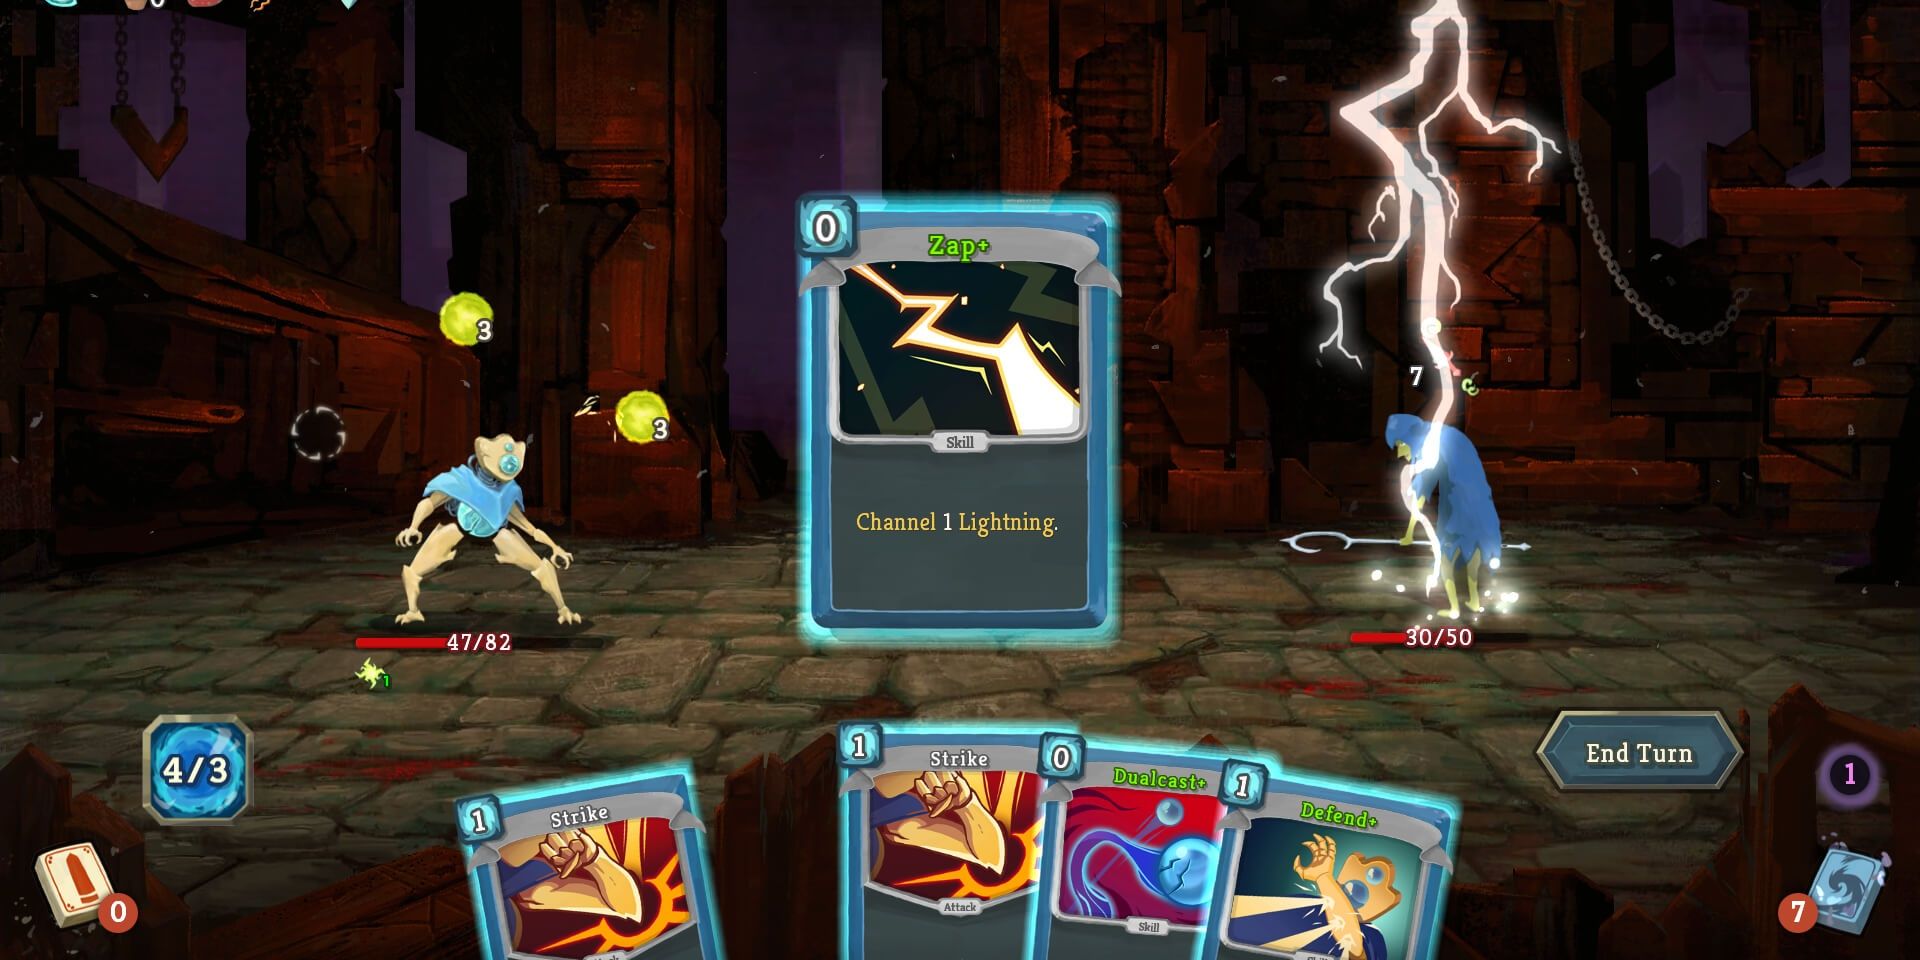 A screenshot showing gameplay in Slay the Spire